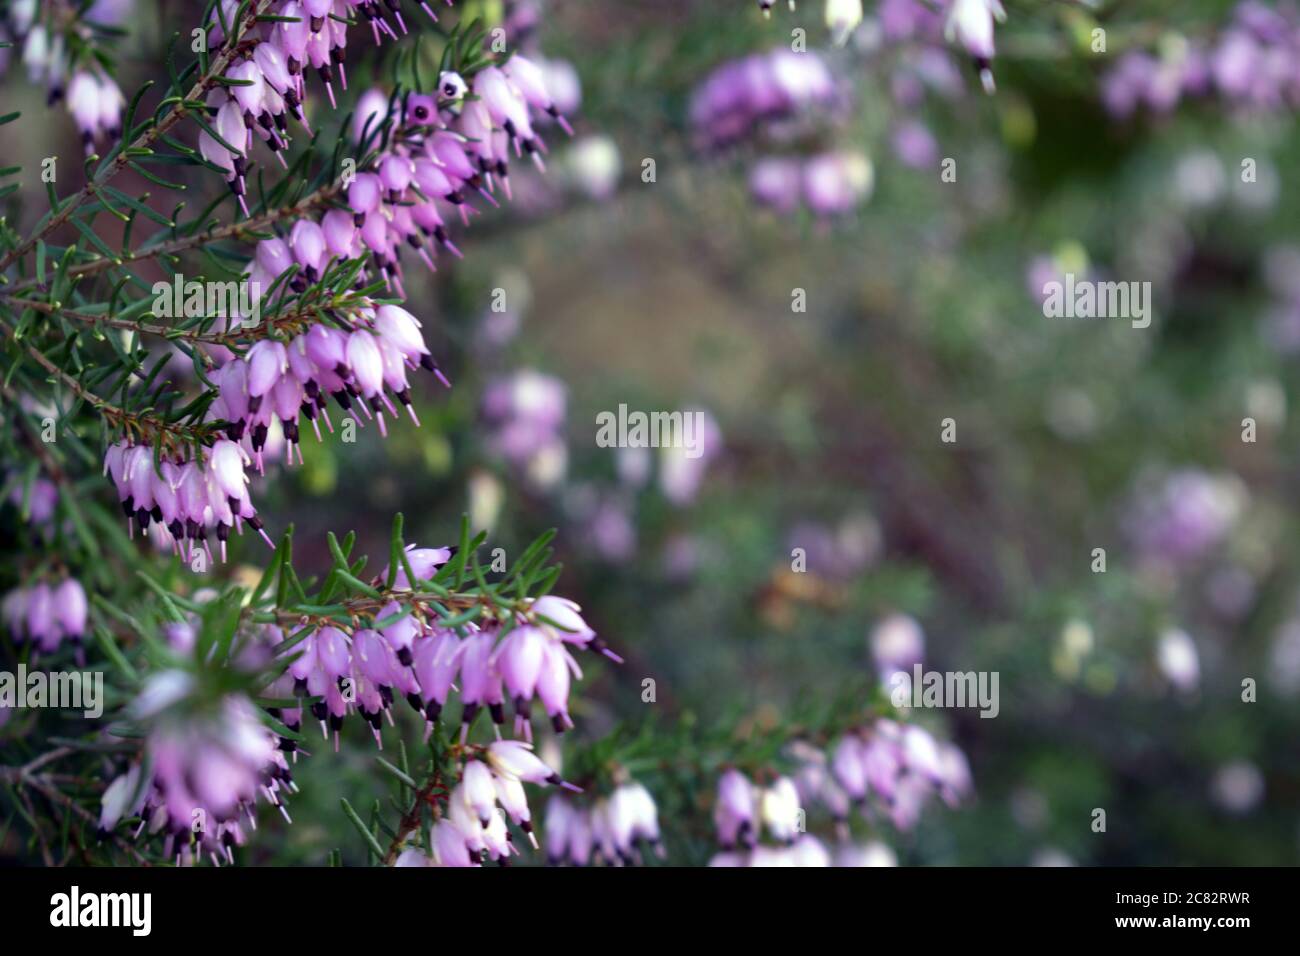 Soft focus of pink winter heath flowers on a bush against a blurry background Stock Photo